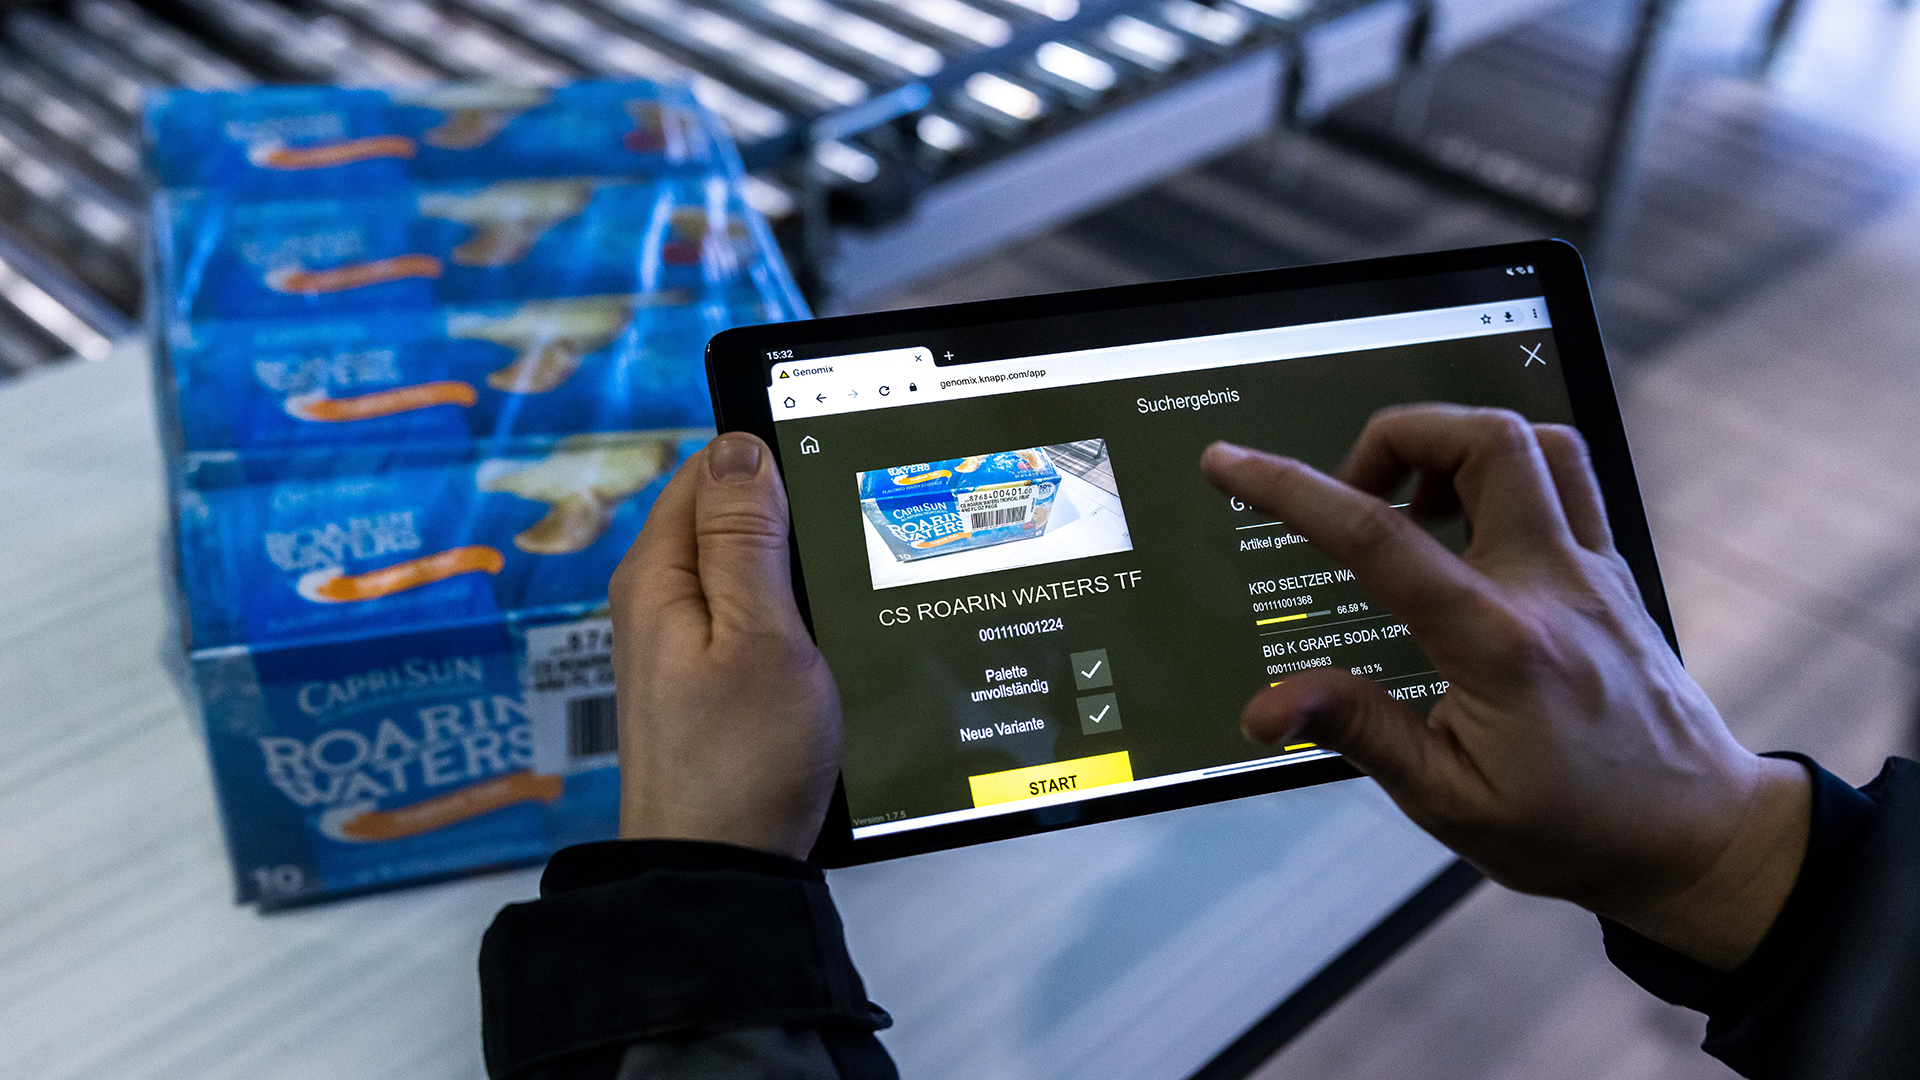 The figure shows a person operating a tablet. The screen displays the KiSoft Genomix app. A carton with items is in the background. Using the app, the employee records all relevant attributes of the item displayed in the background.